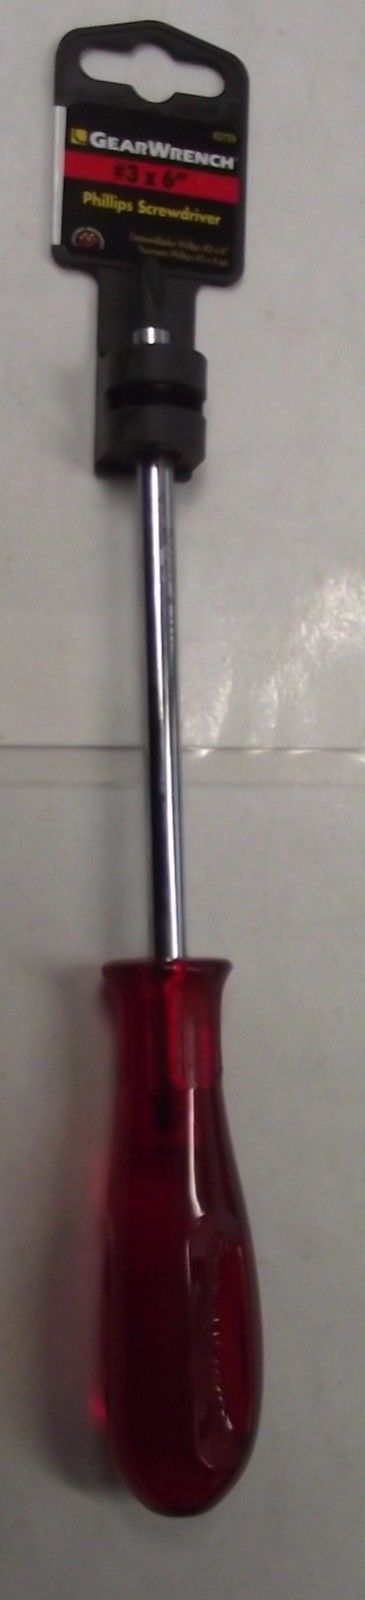 GearWrench 82720 Acetate Phillips Screwdriver #3 x 6"